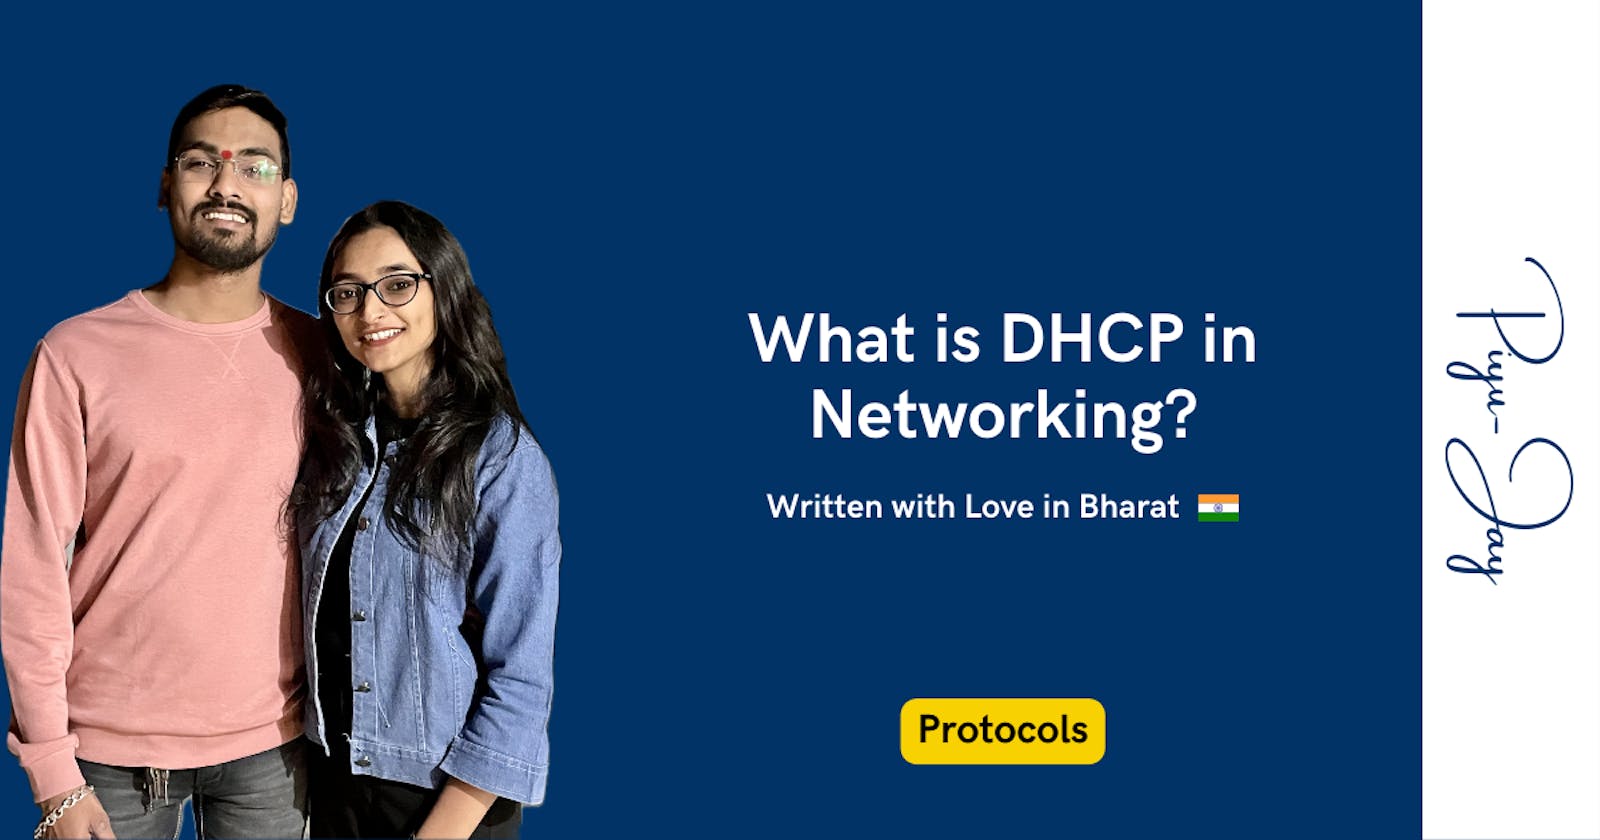 What is DHCP in Networking?